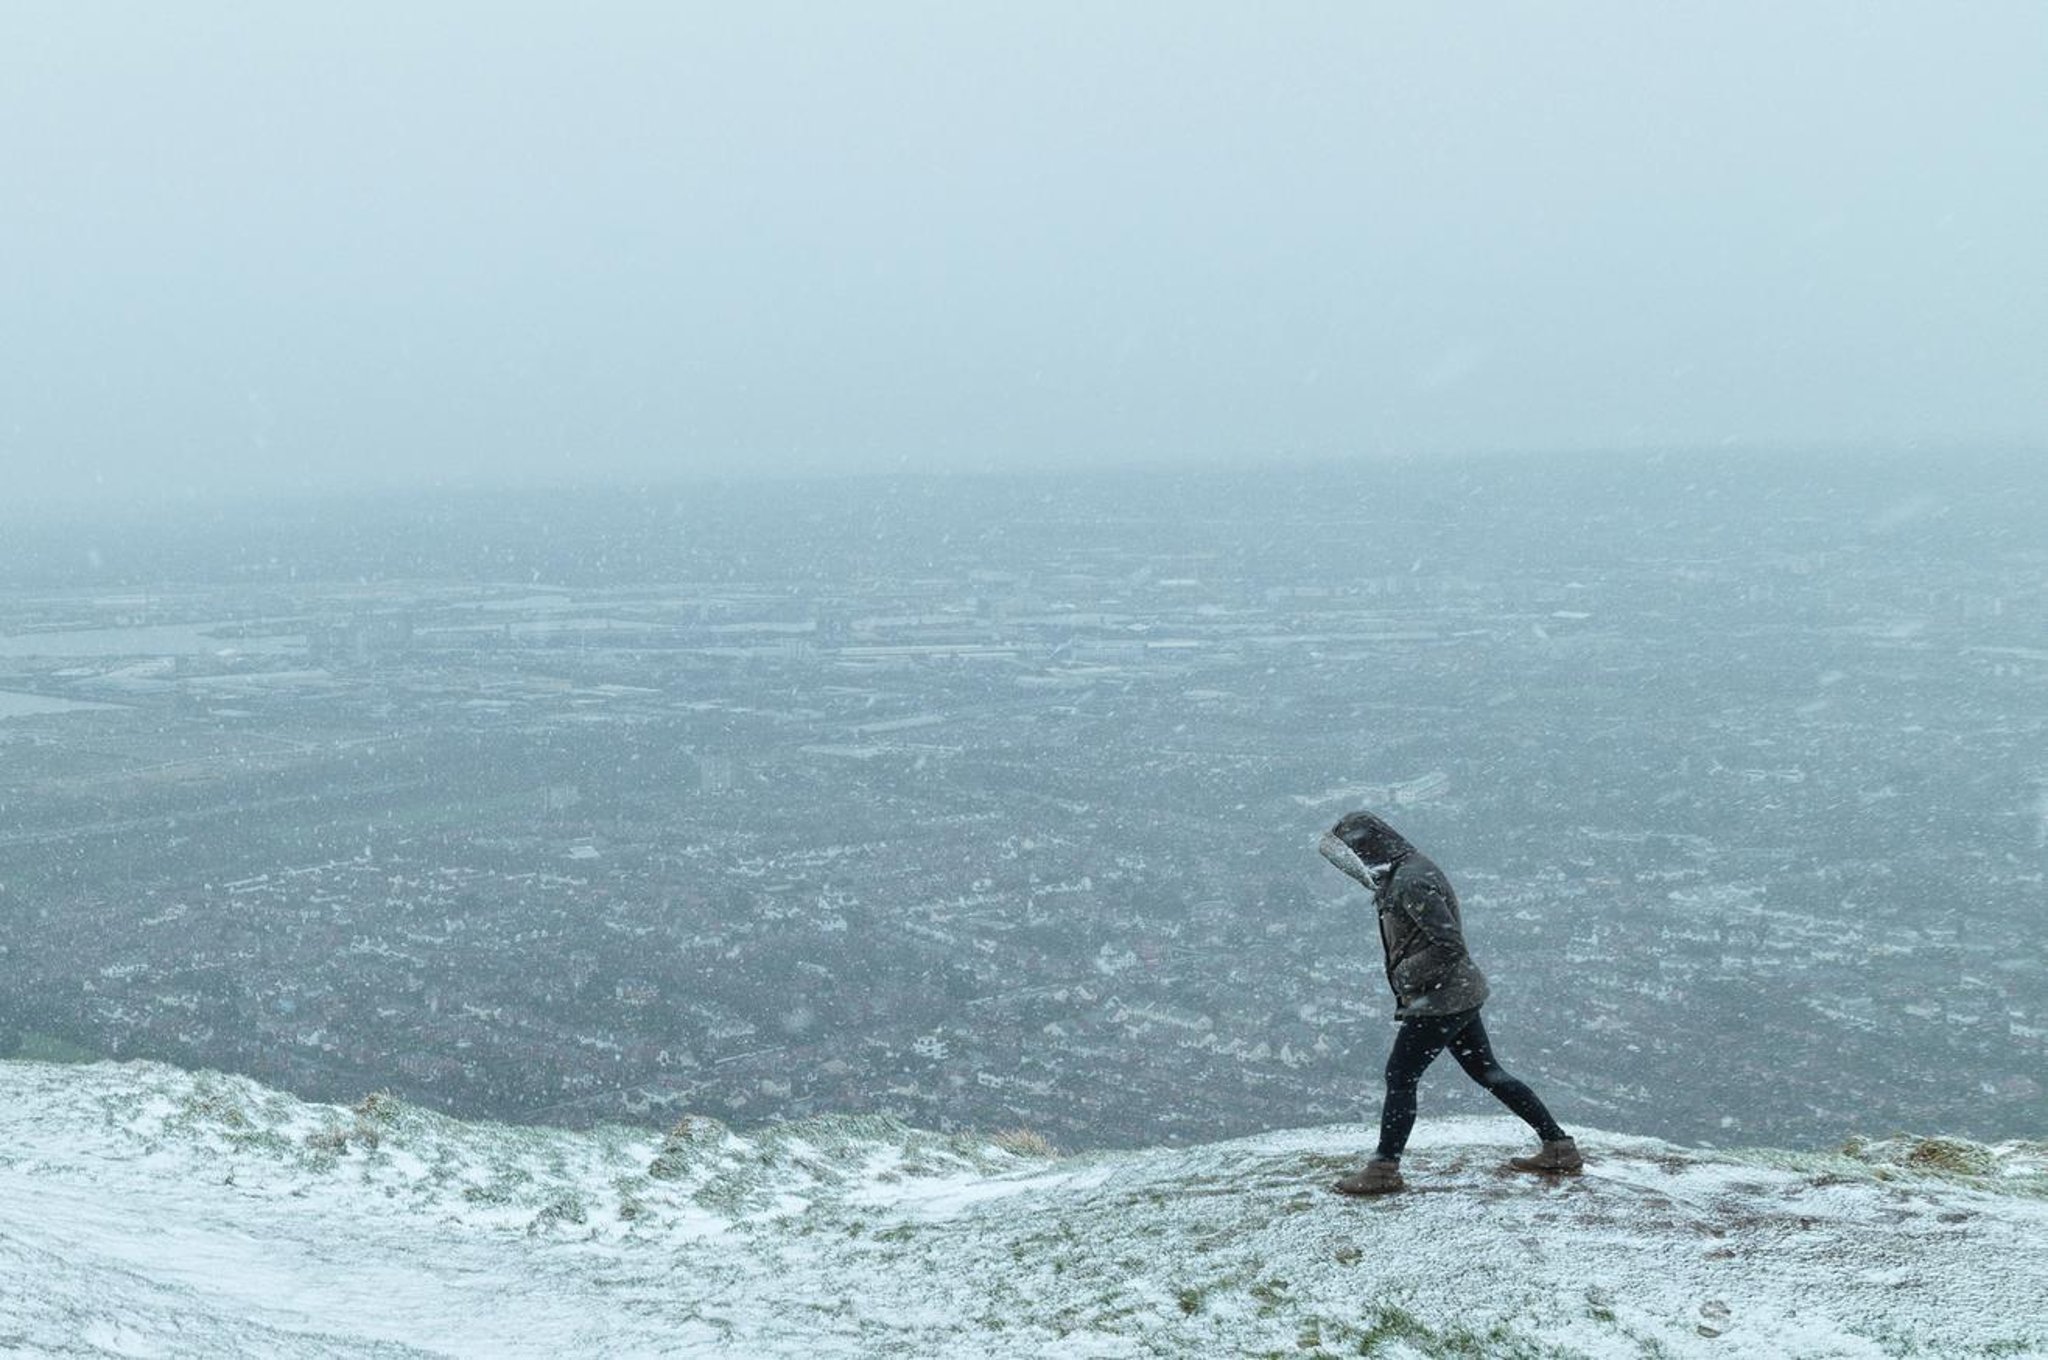 Northern Ireland Weather Warning: Met Office issues yellow weather warning for wind and snow